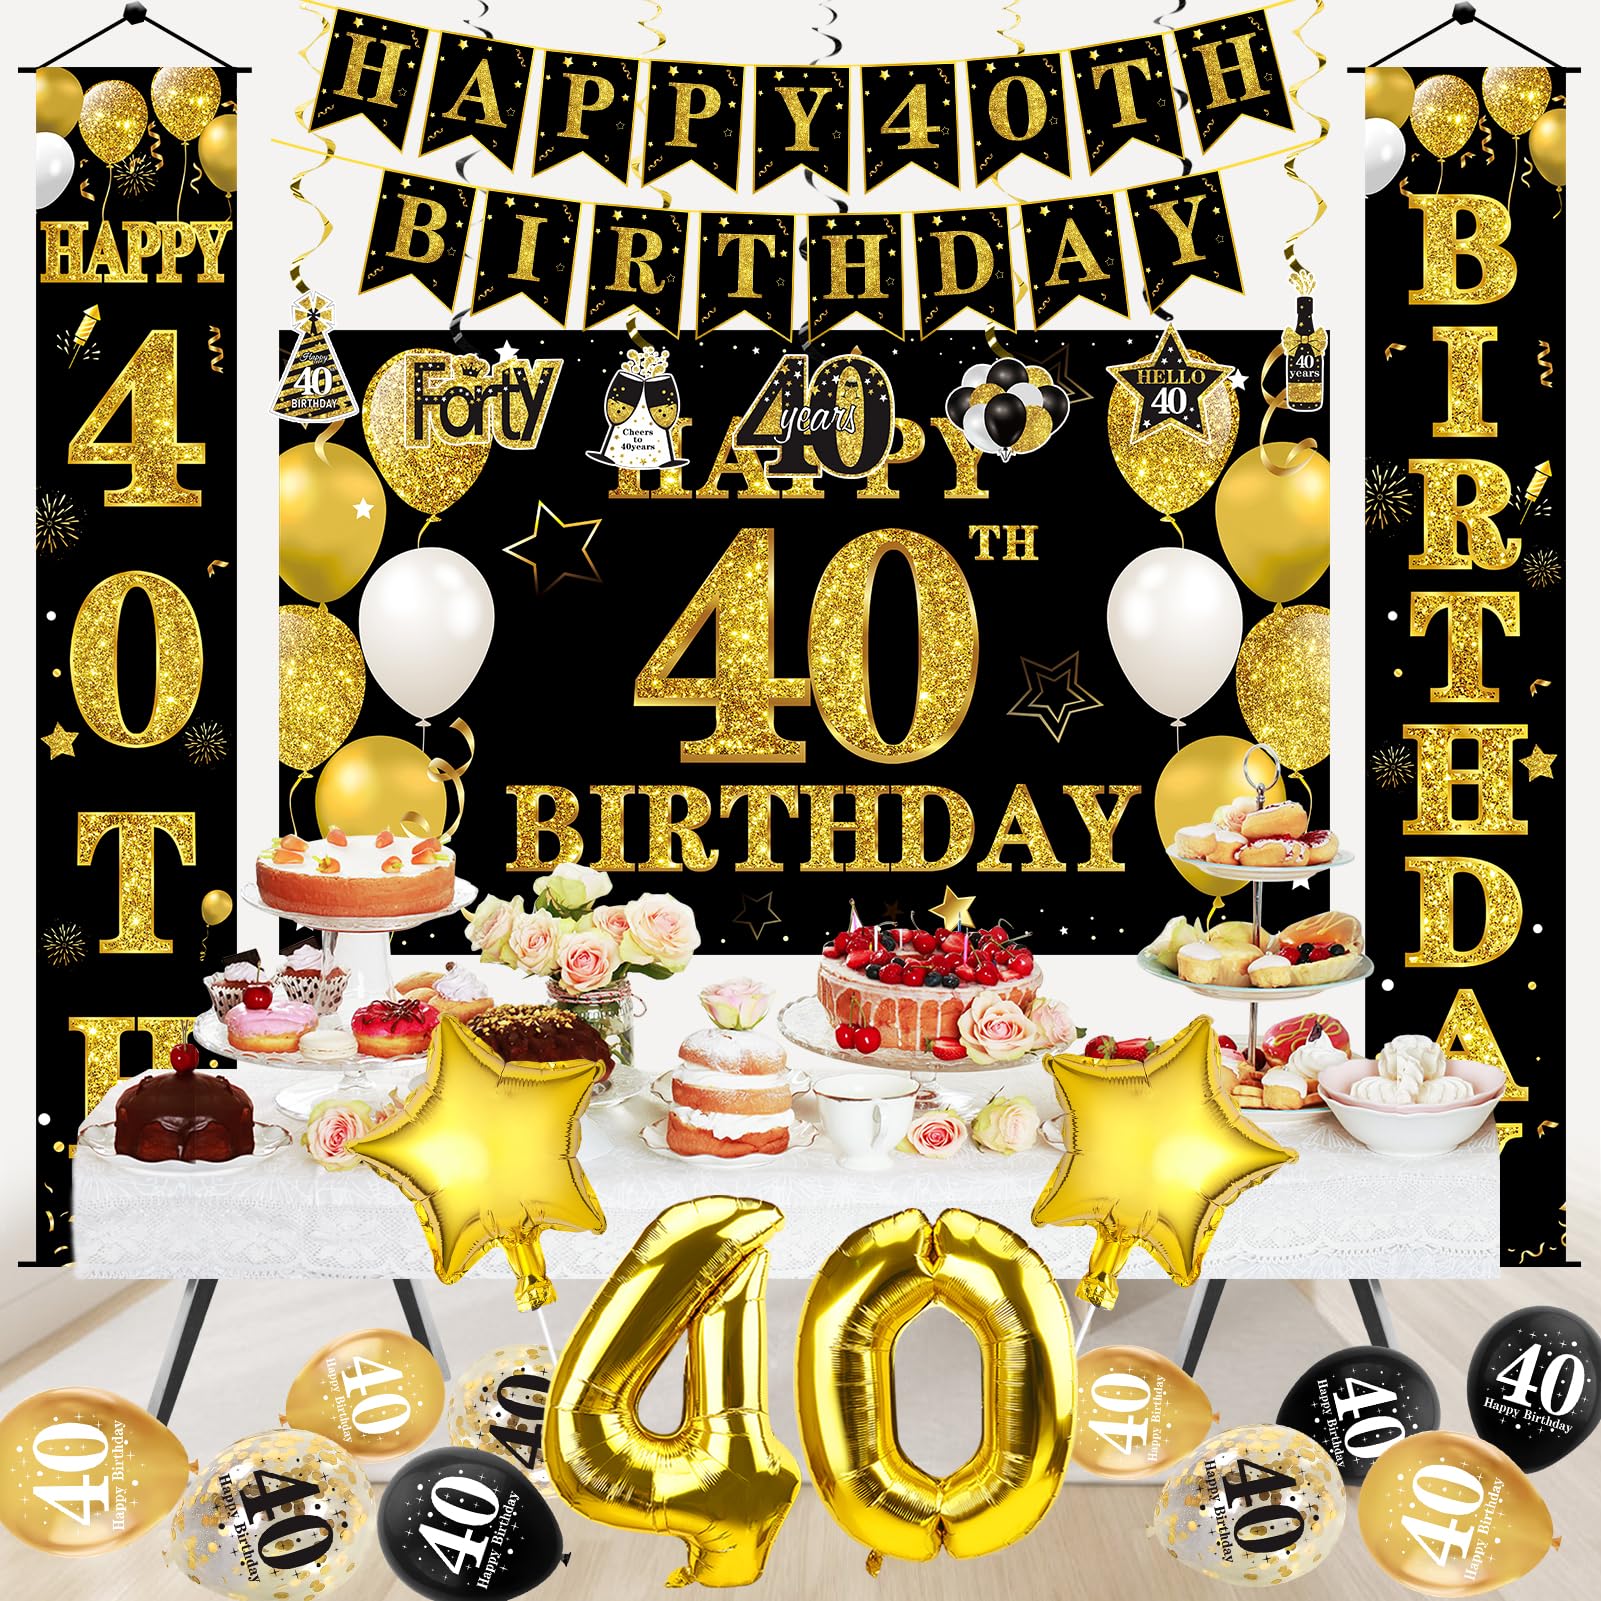 32Pcs 40th Birthday Decorations Kit for Men Women, Black Gold Happy 40 Birthday Banner Balloons Hanging Swirls Kit Party Supplies, Forty Year Old Birthday Backdrop Props Sign Decor